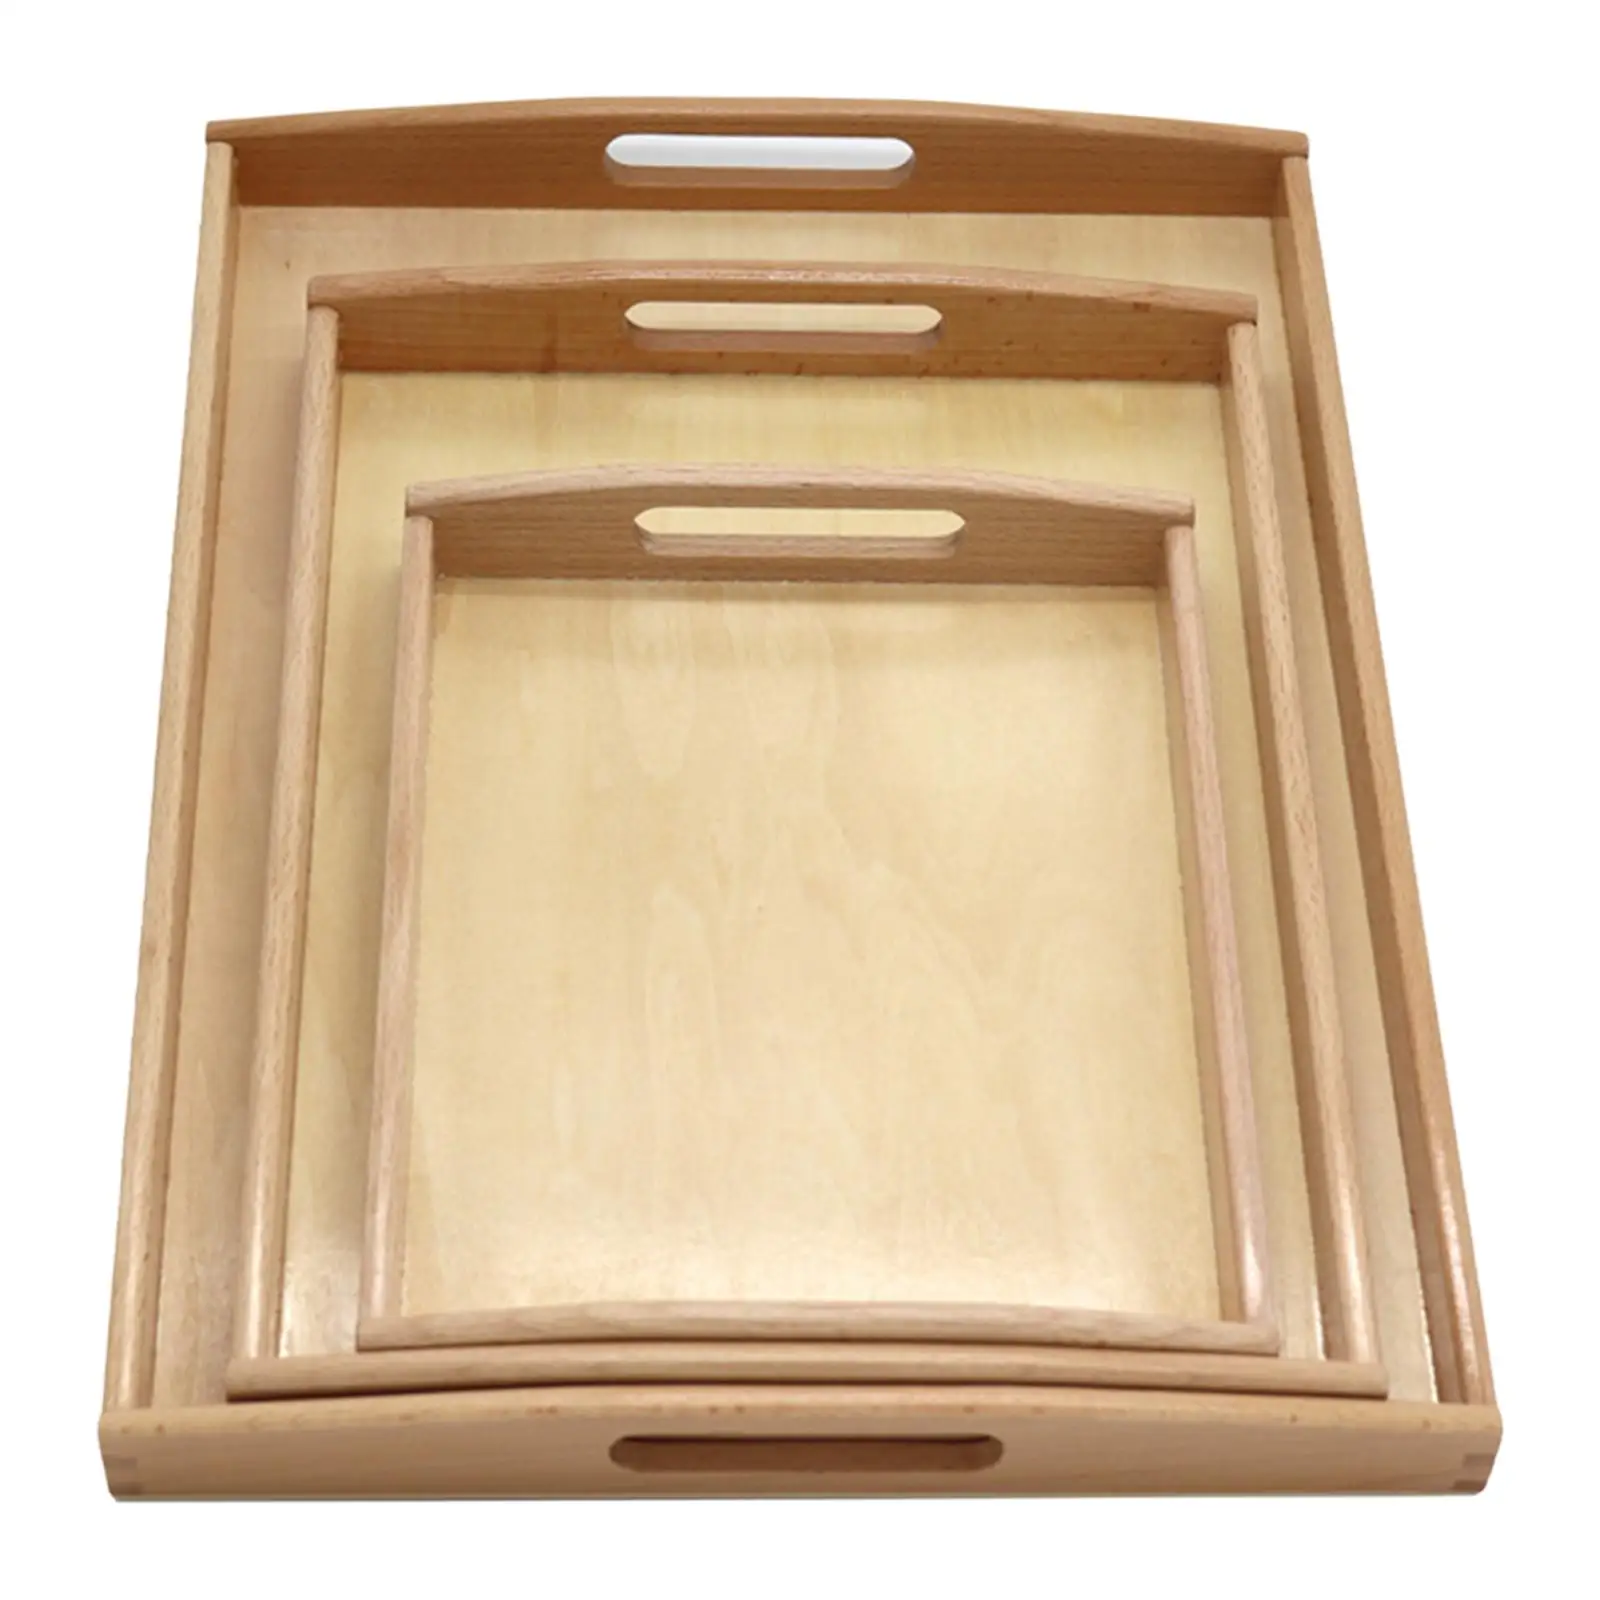 Wood Serving Tray Durable Montessori Wooden Tray for Home Decor